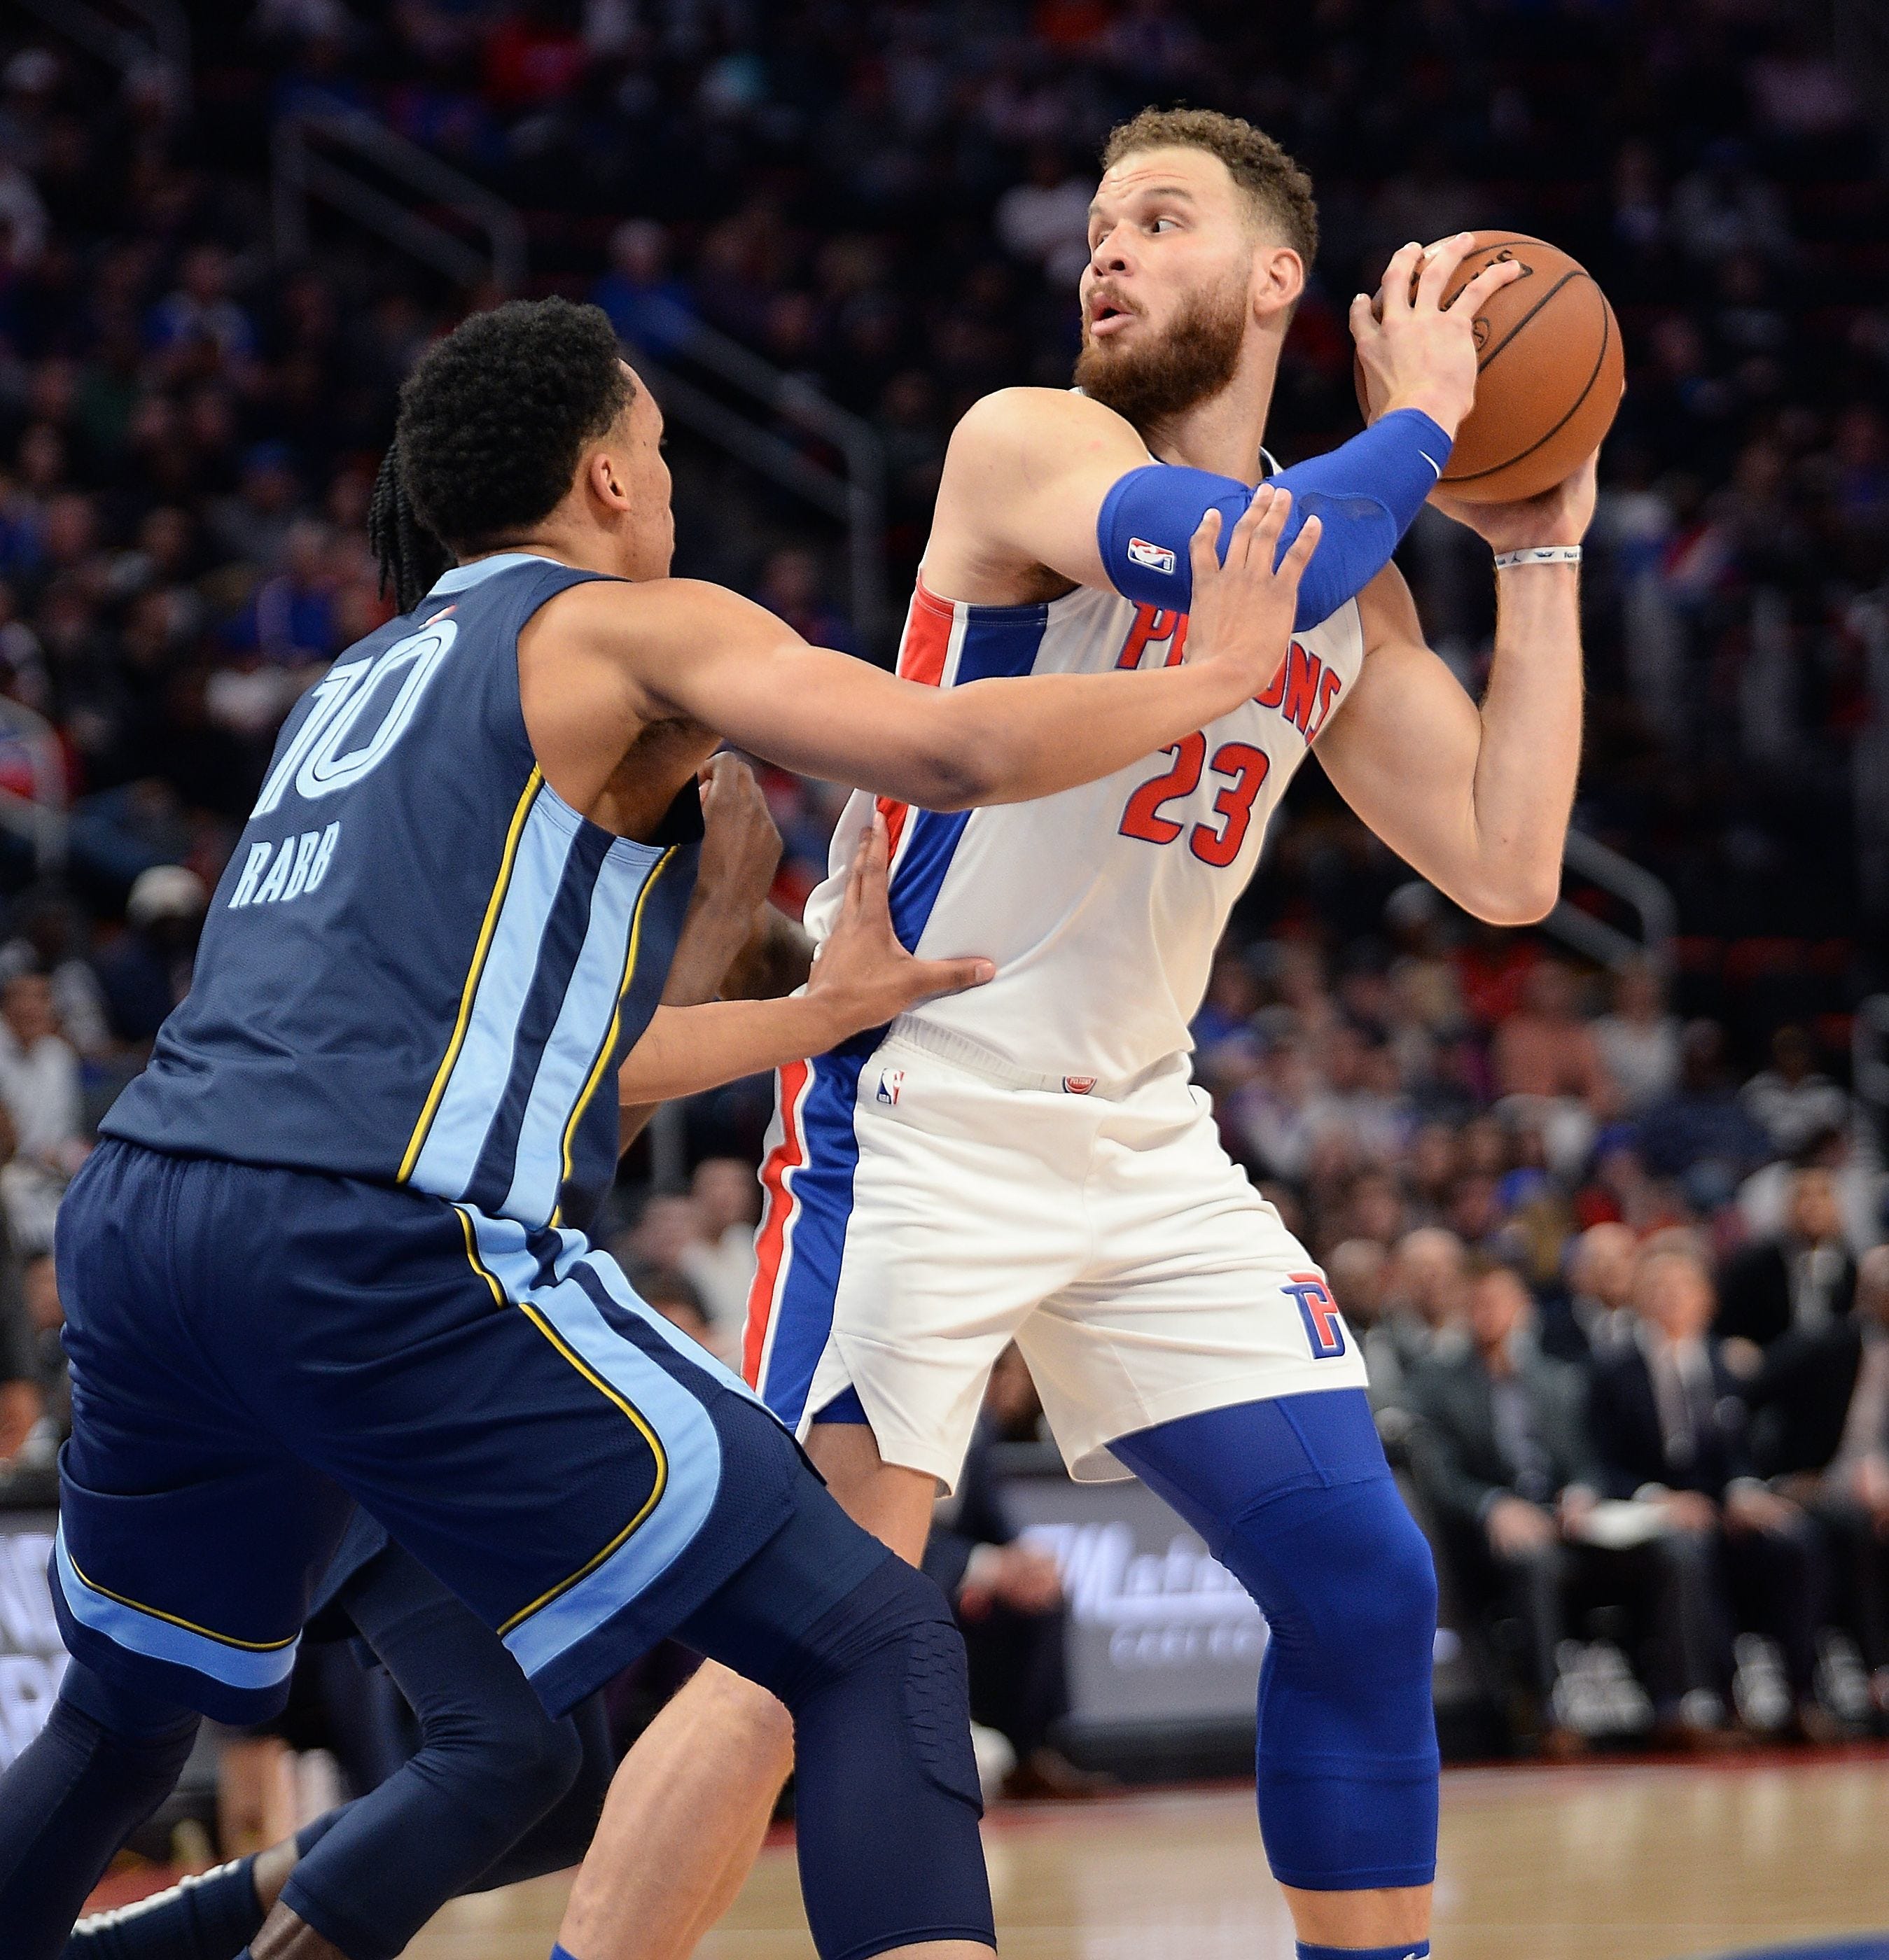 With only 13 back-to-backs this upcoming season, the Pistons will have ample opportunities to give Blake Griffin some extra rest.